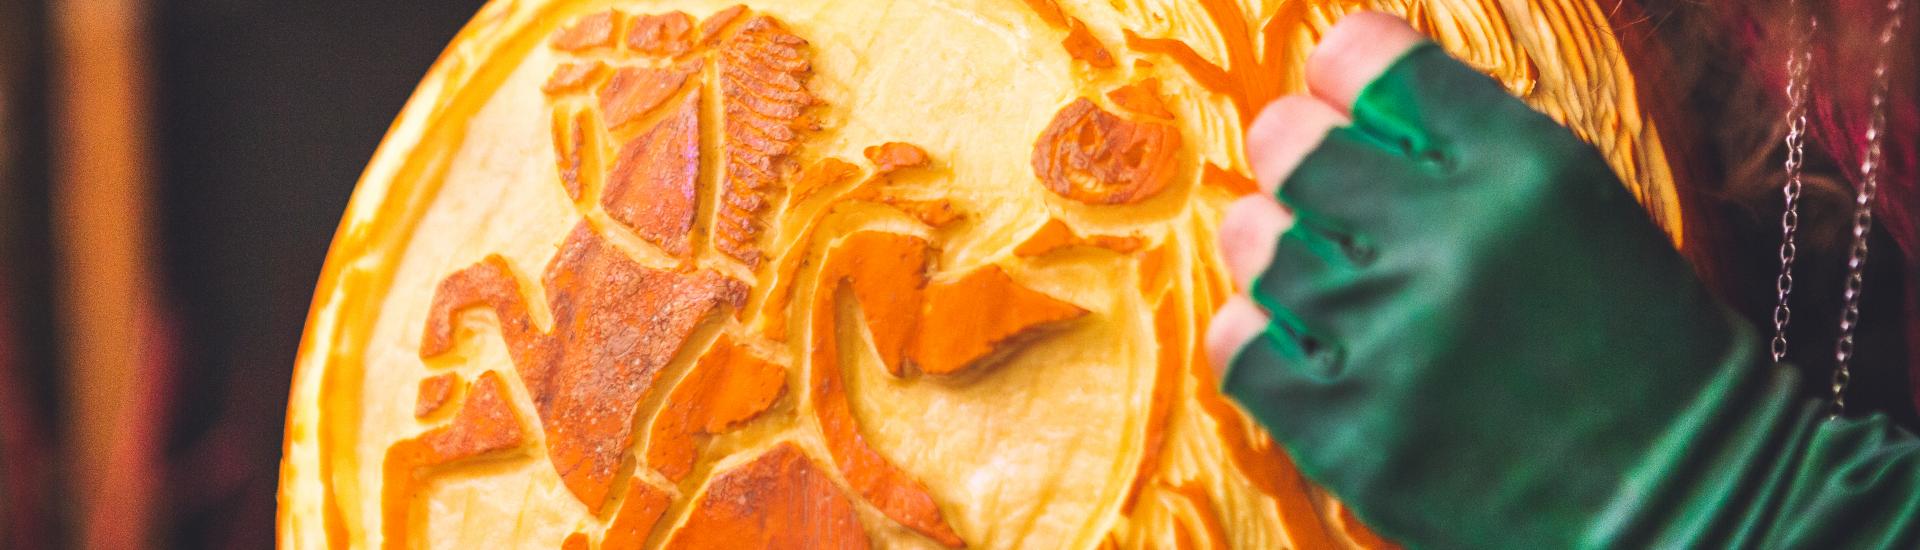 A close up of two hands carving out a design on a pumpkin